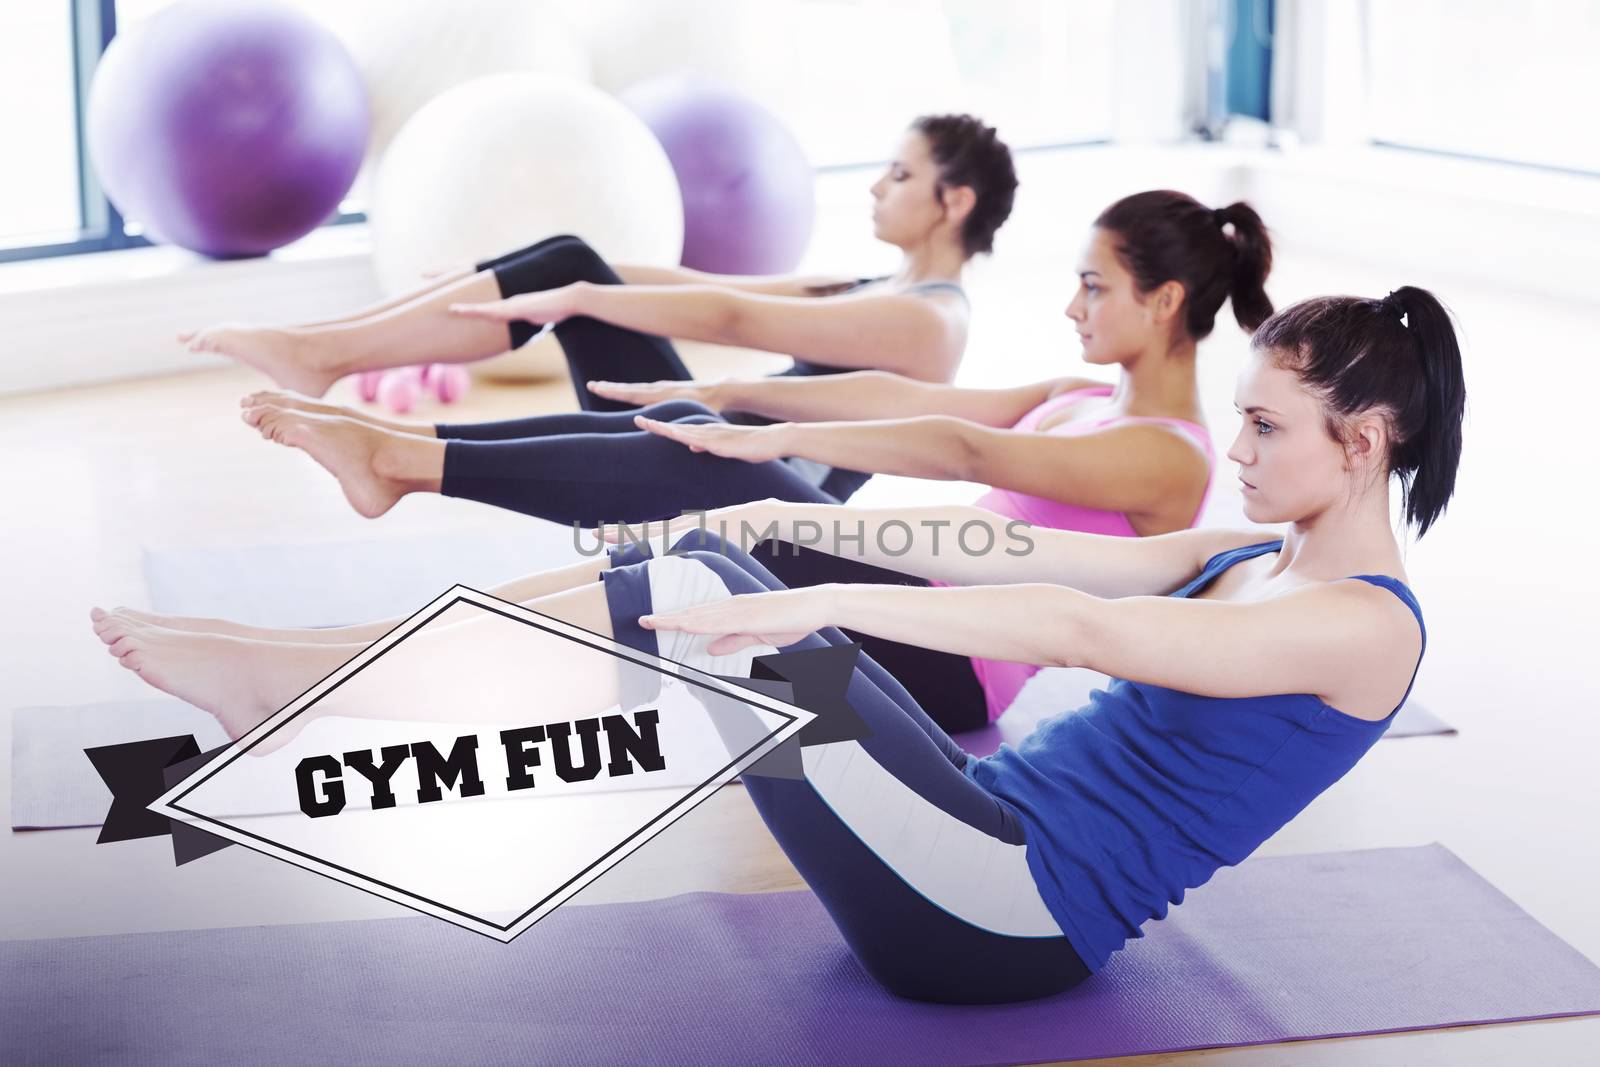 The word gym fun and class stretching on mats at yoga class in fitness studio against badge